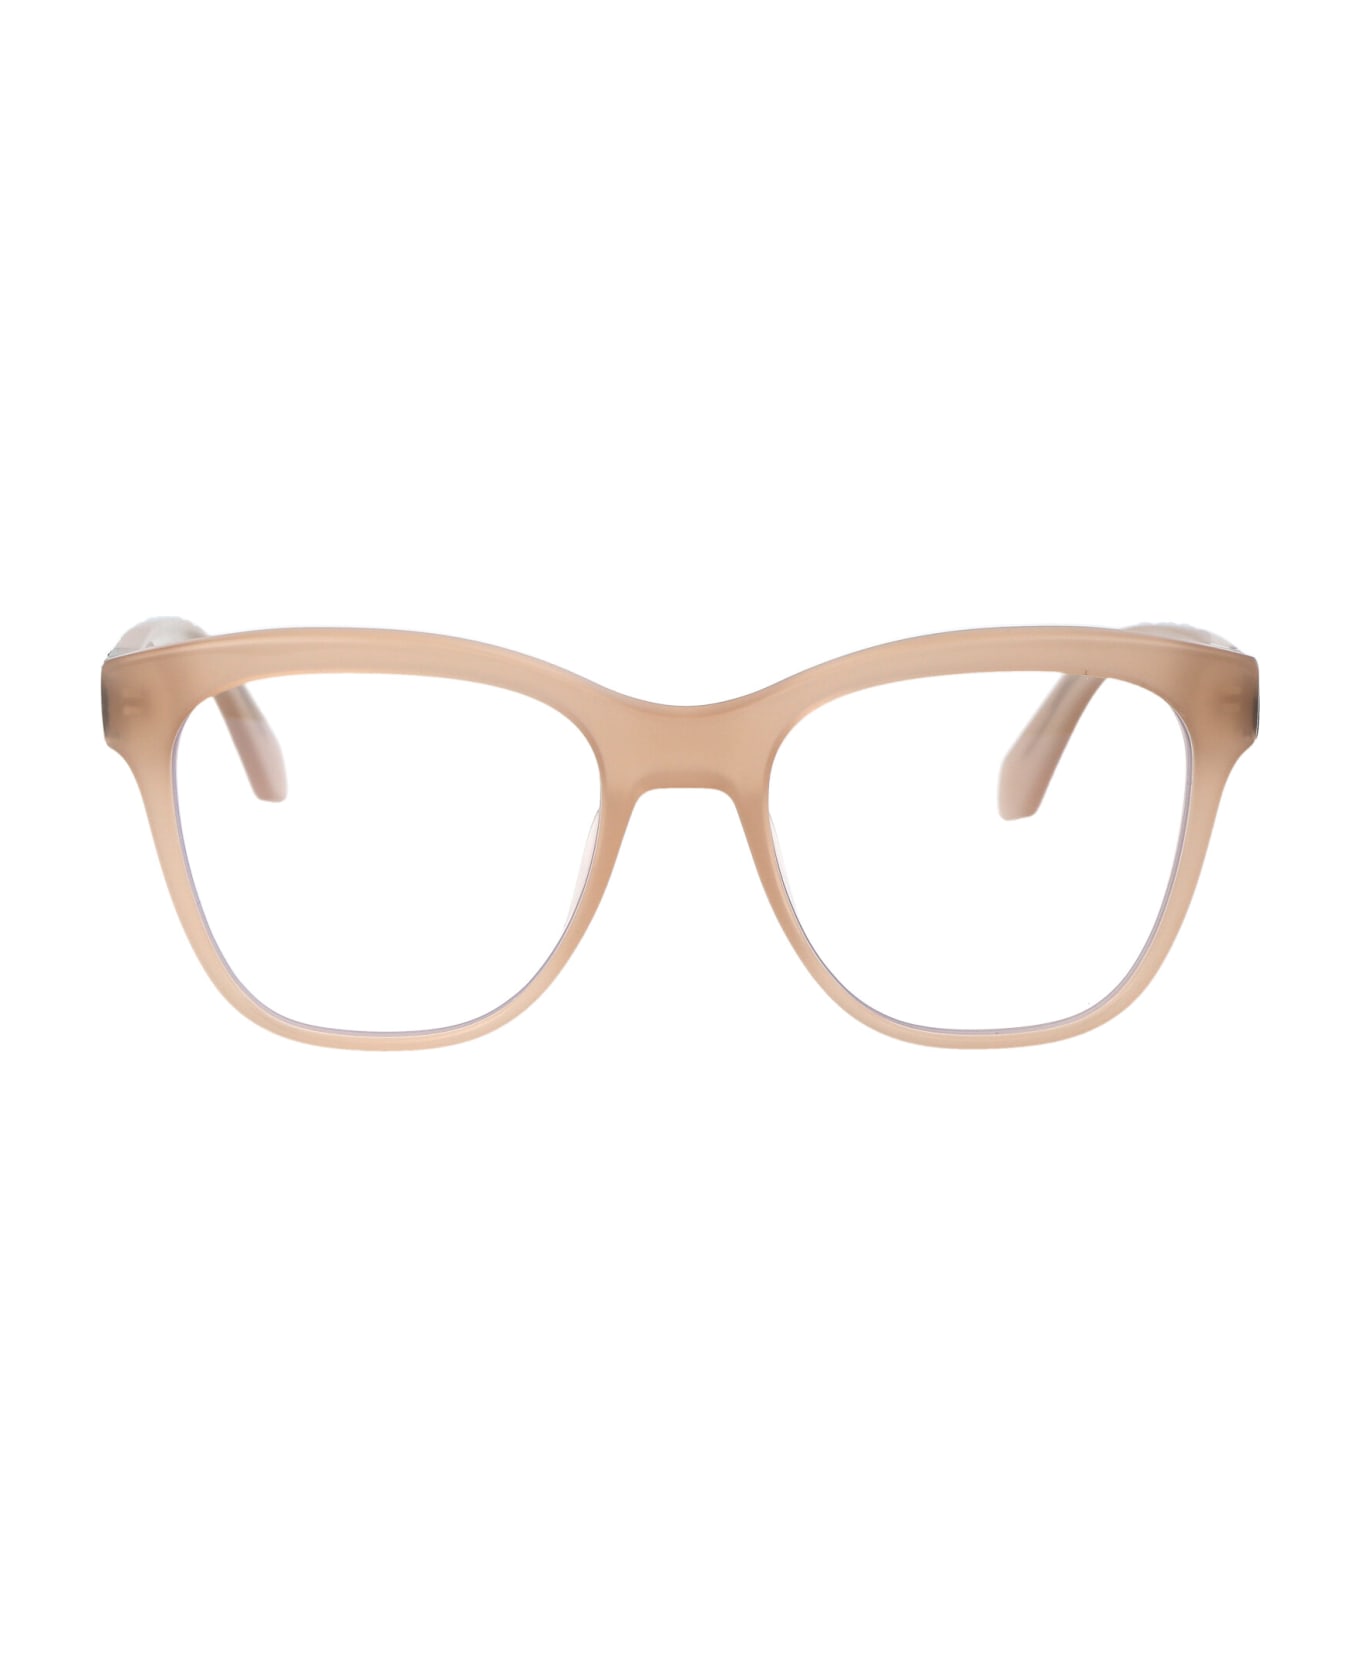 Off-White Optical Style 69 Glasses - 6100 BEIGE 